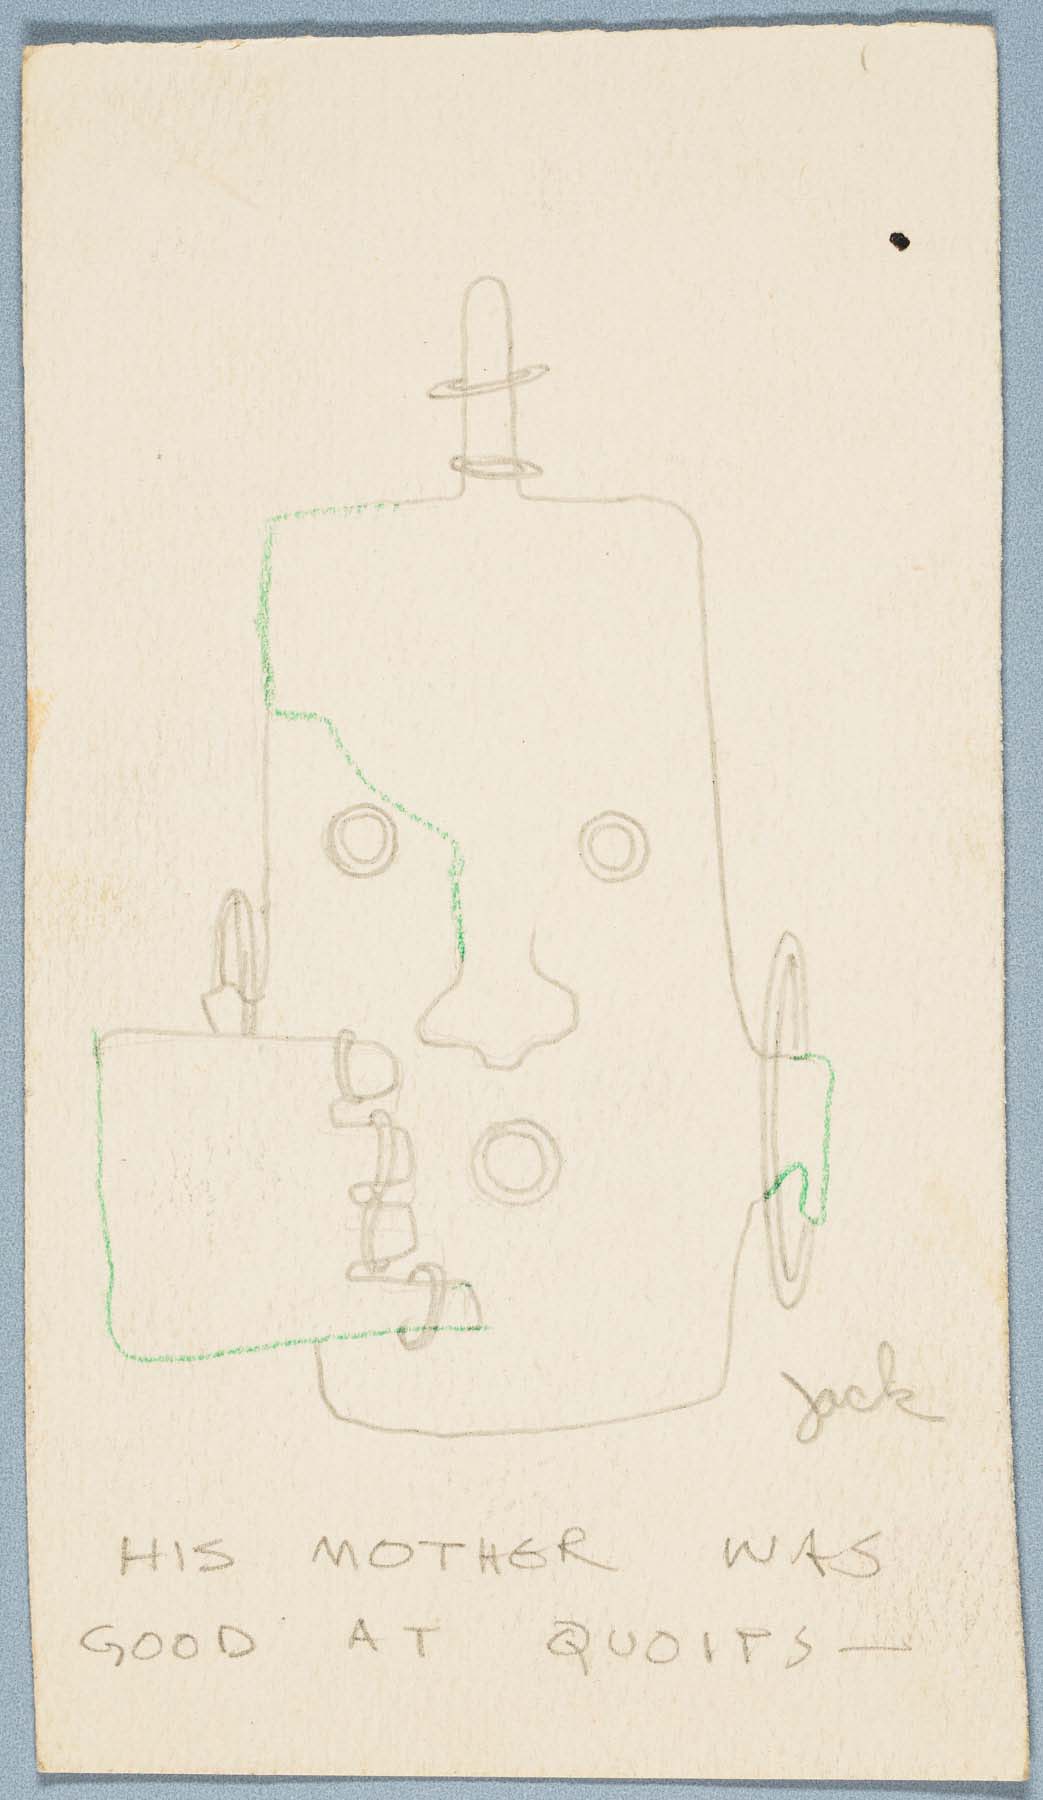 Abstract pencil drawing of a rectangular face with circular shapes for ears, eyes, and mouth above the words “His mother was good at quoits.”